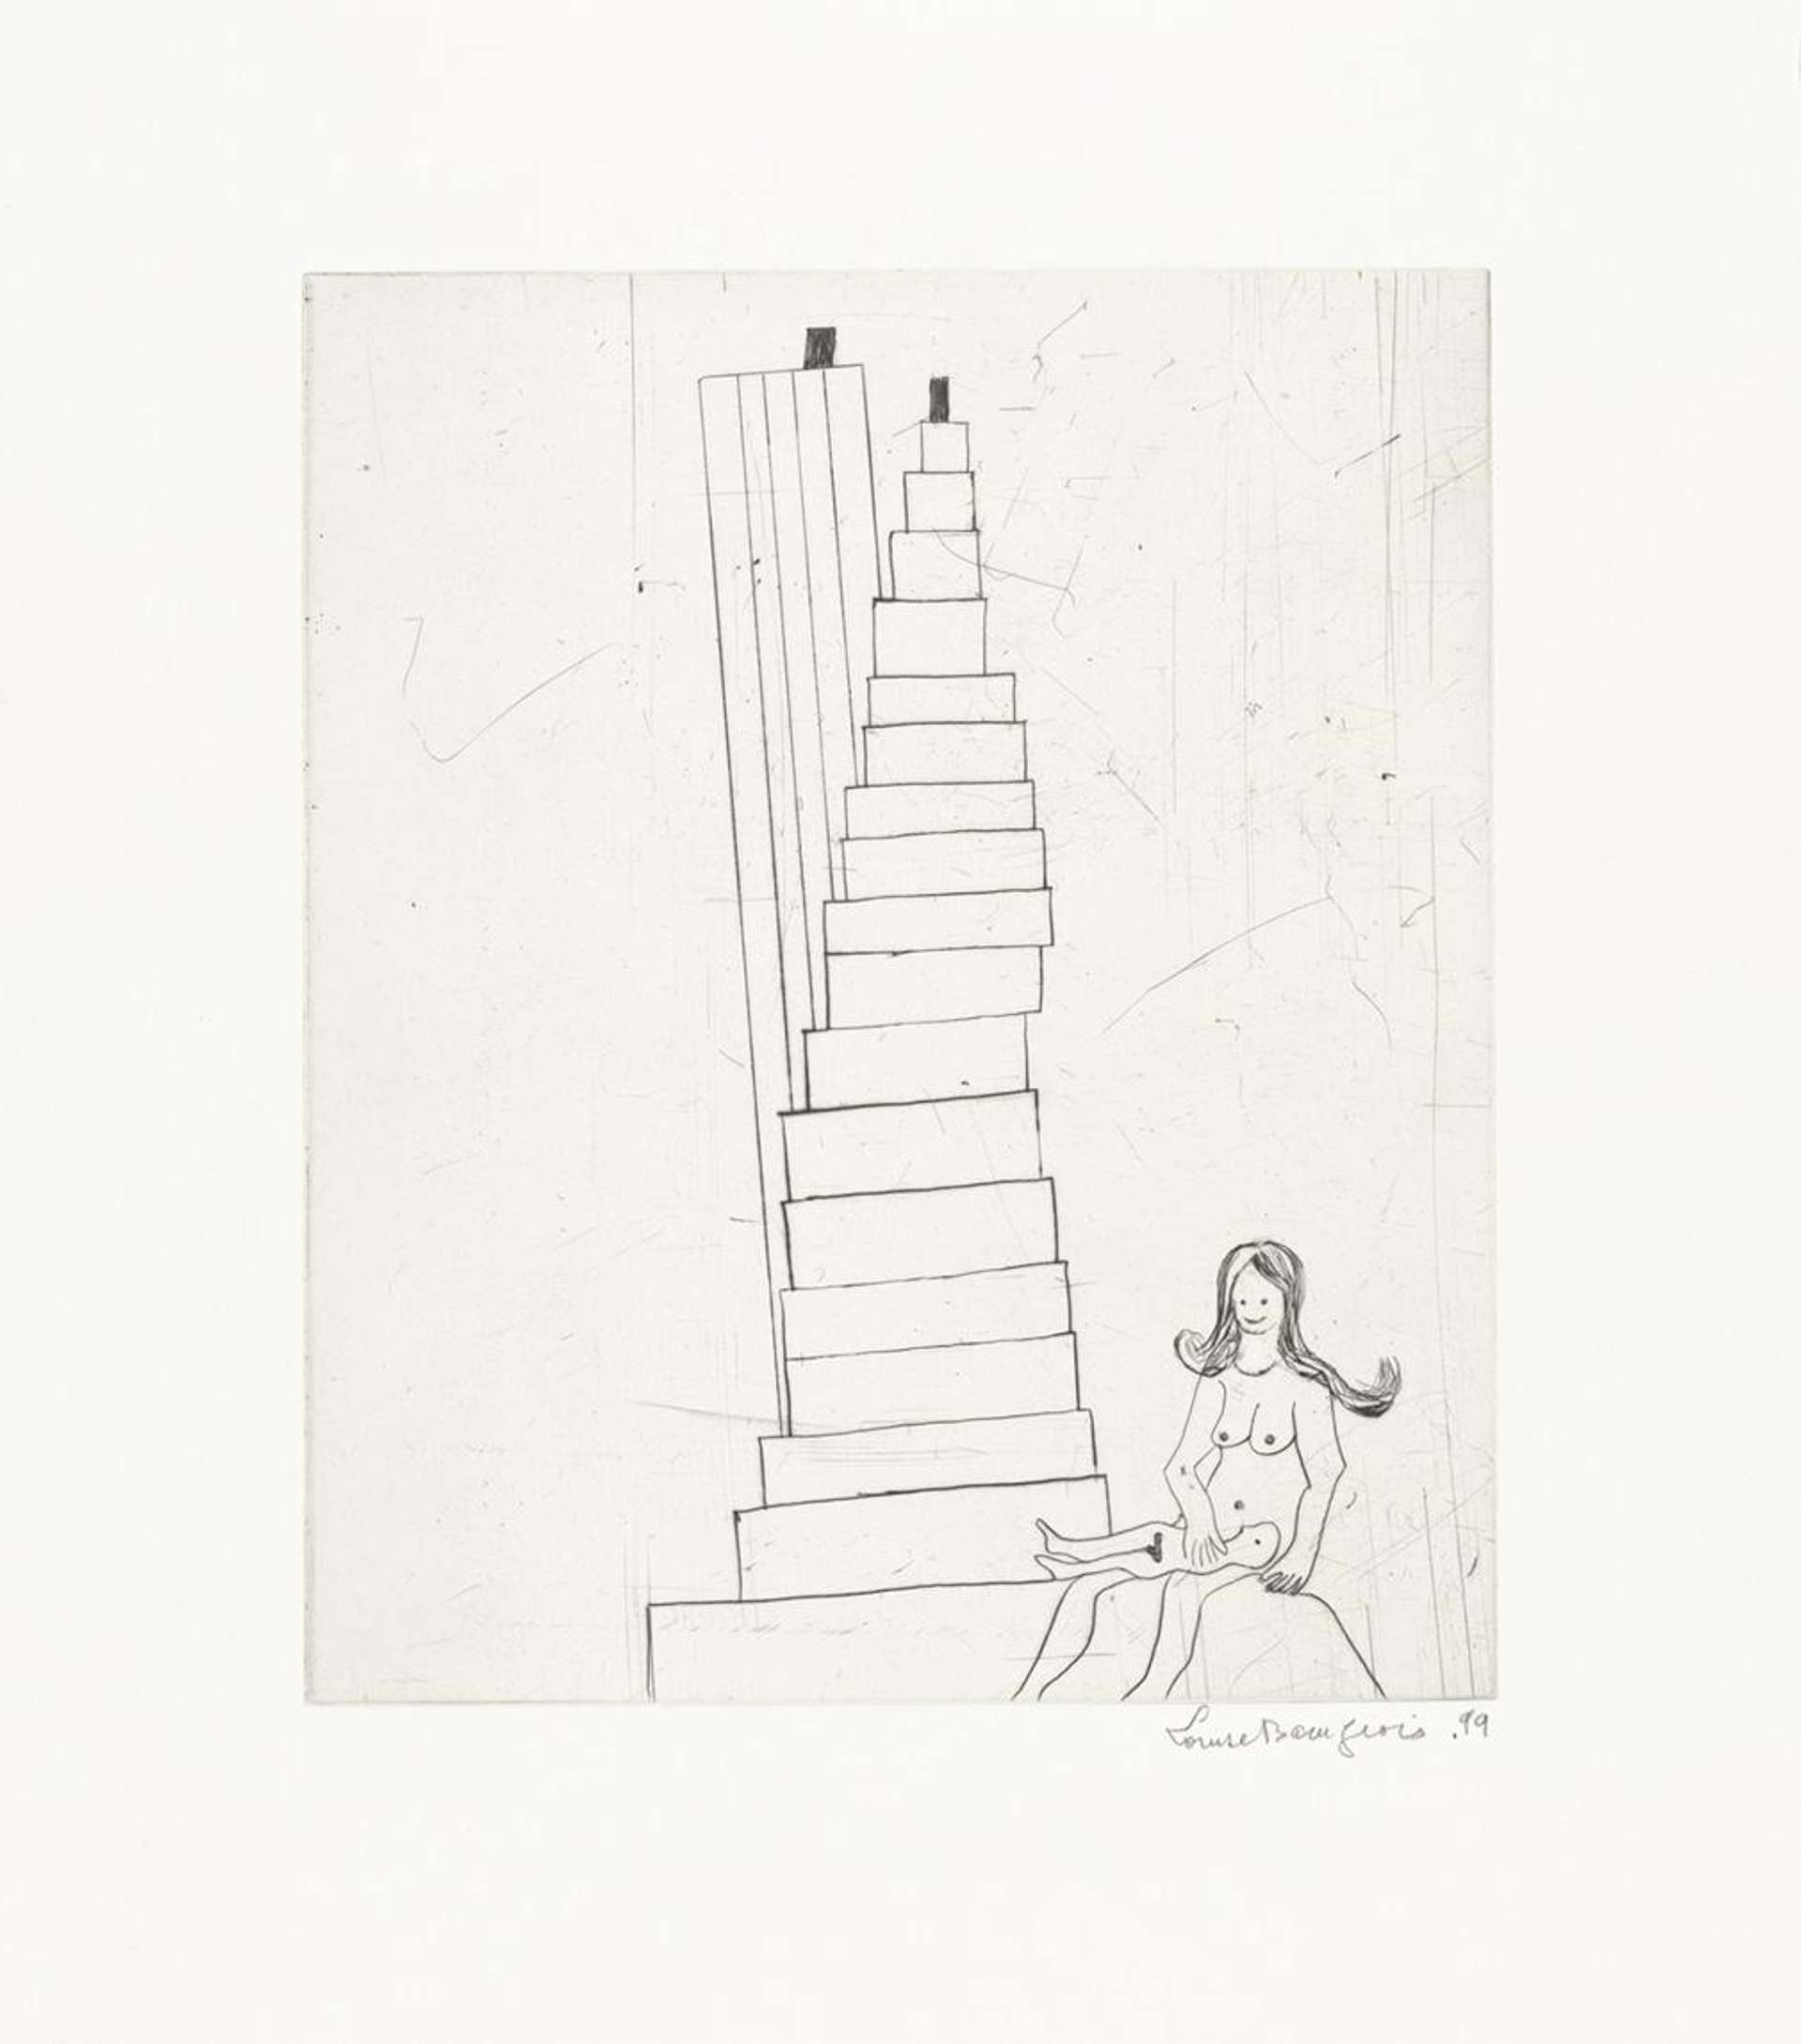 Louise Bourgeois’ Mother And Child. A drypoint print of a nude woman sitting at the bottom of a staircase with her child on her lap.